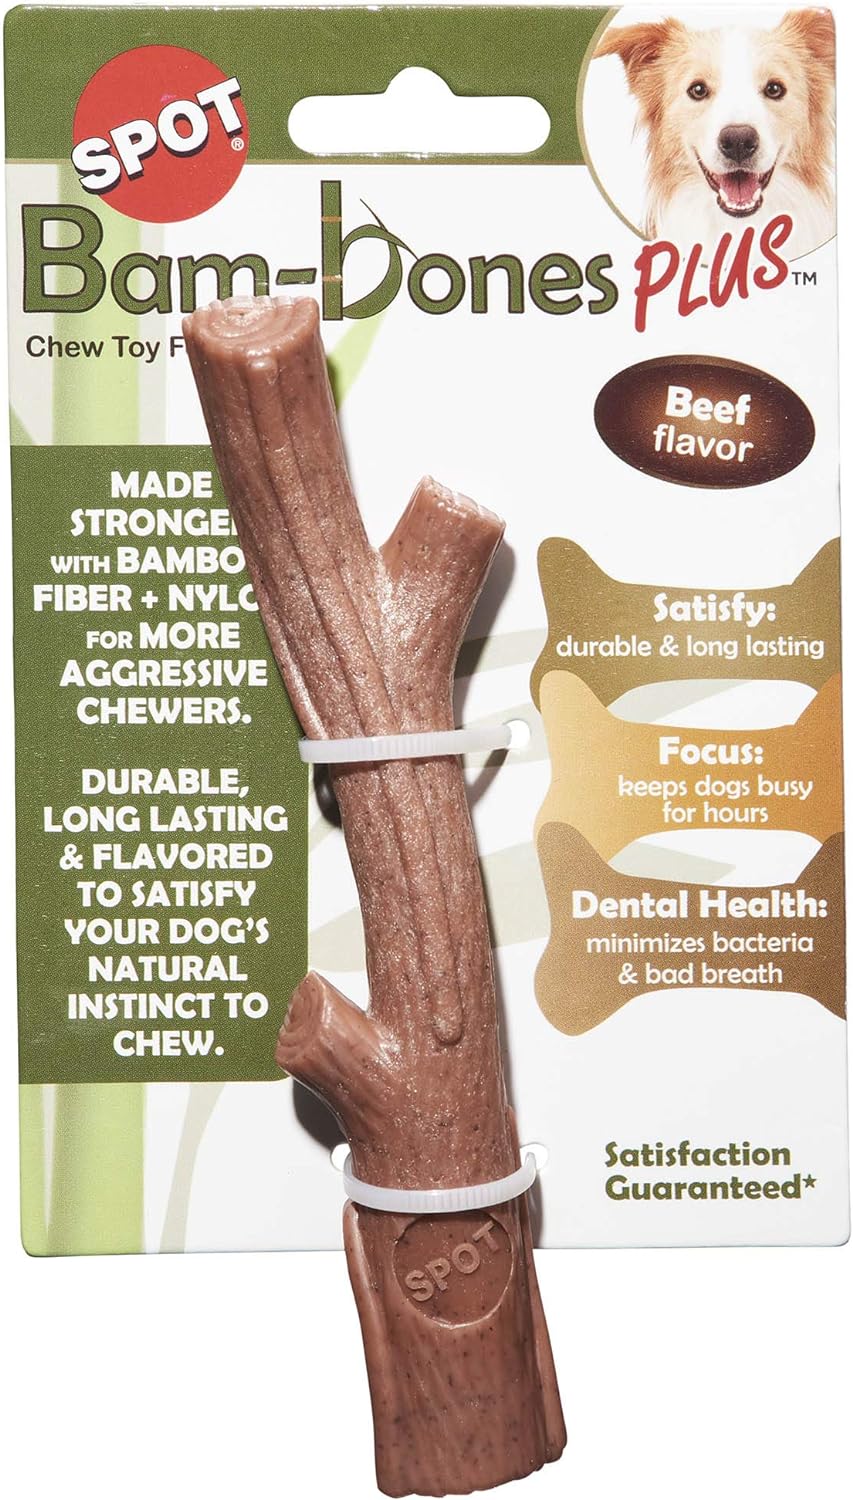 "SPOT Bambone Bamboo Stick Dog Chew Toy - Durable, Non-Splintering, Great for Aggressive Chewers - Large/Medium